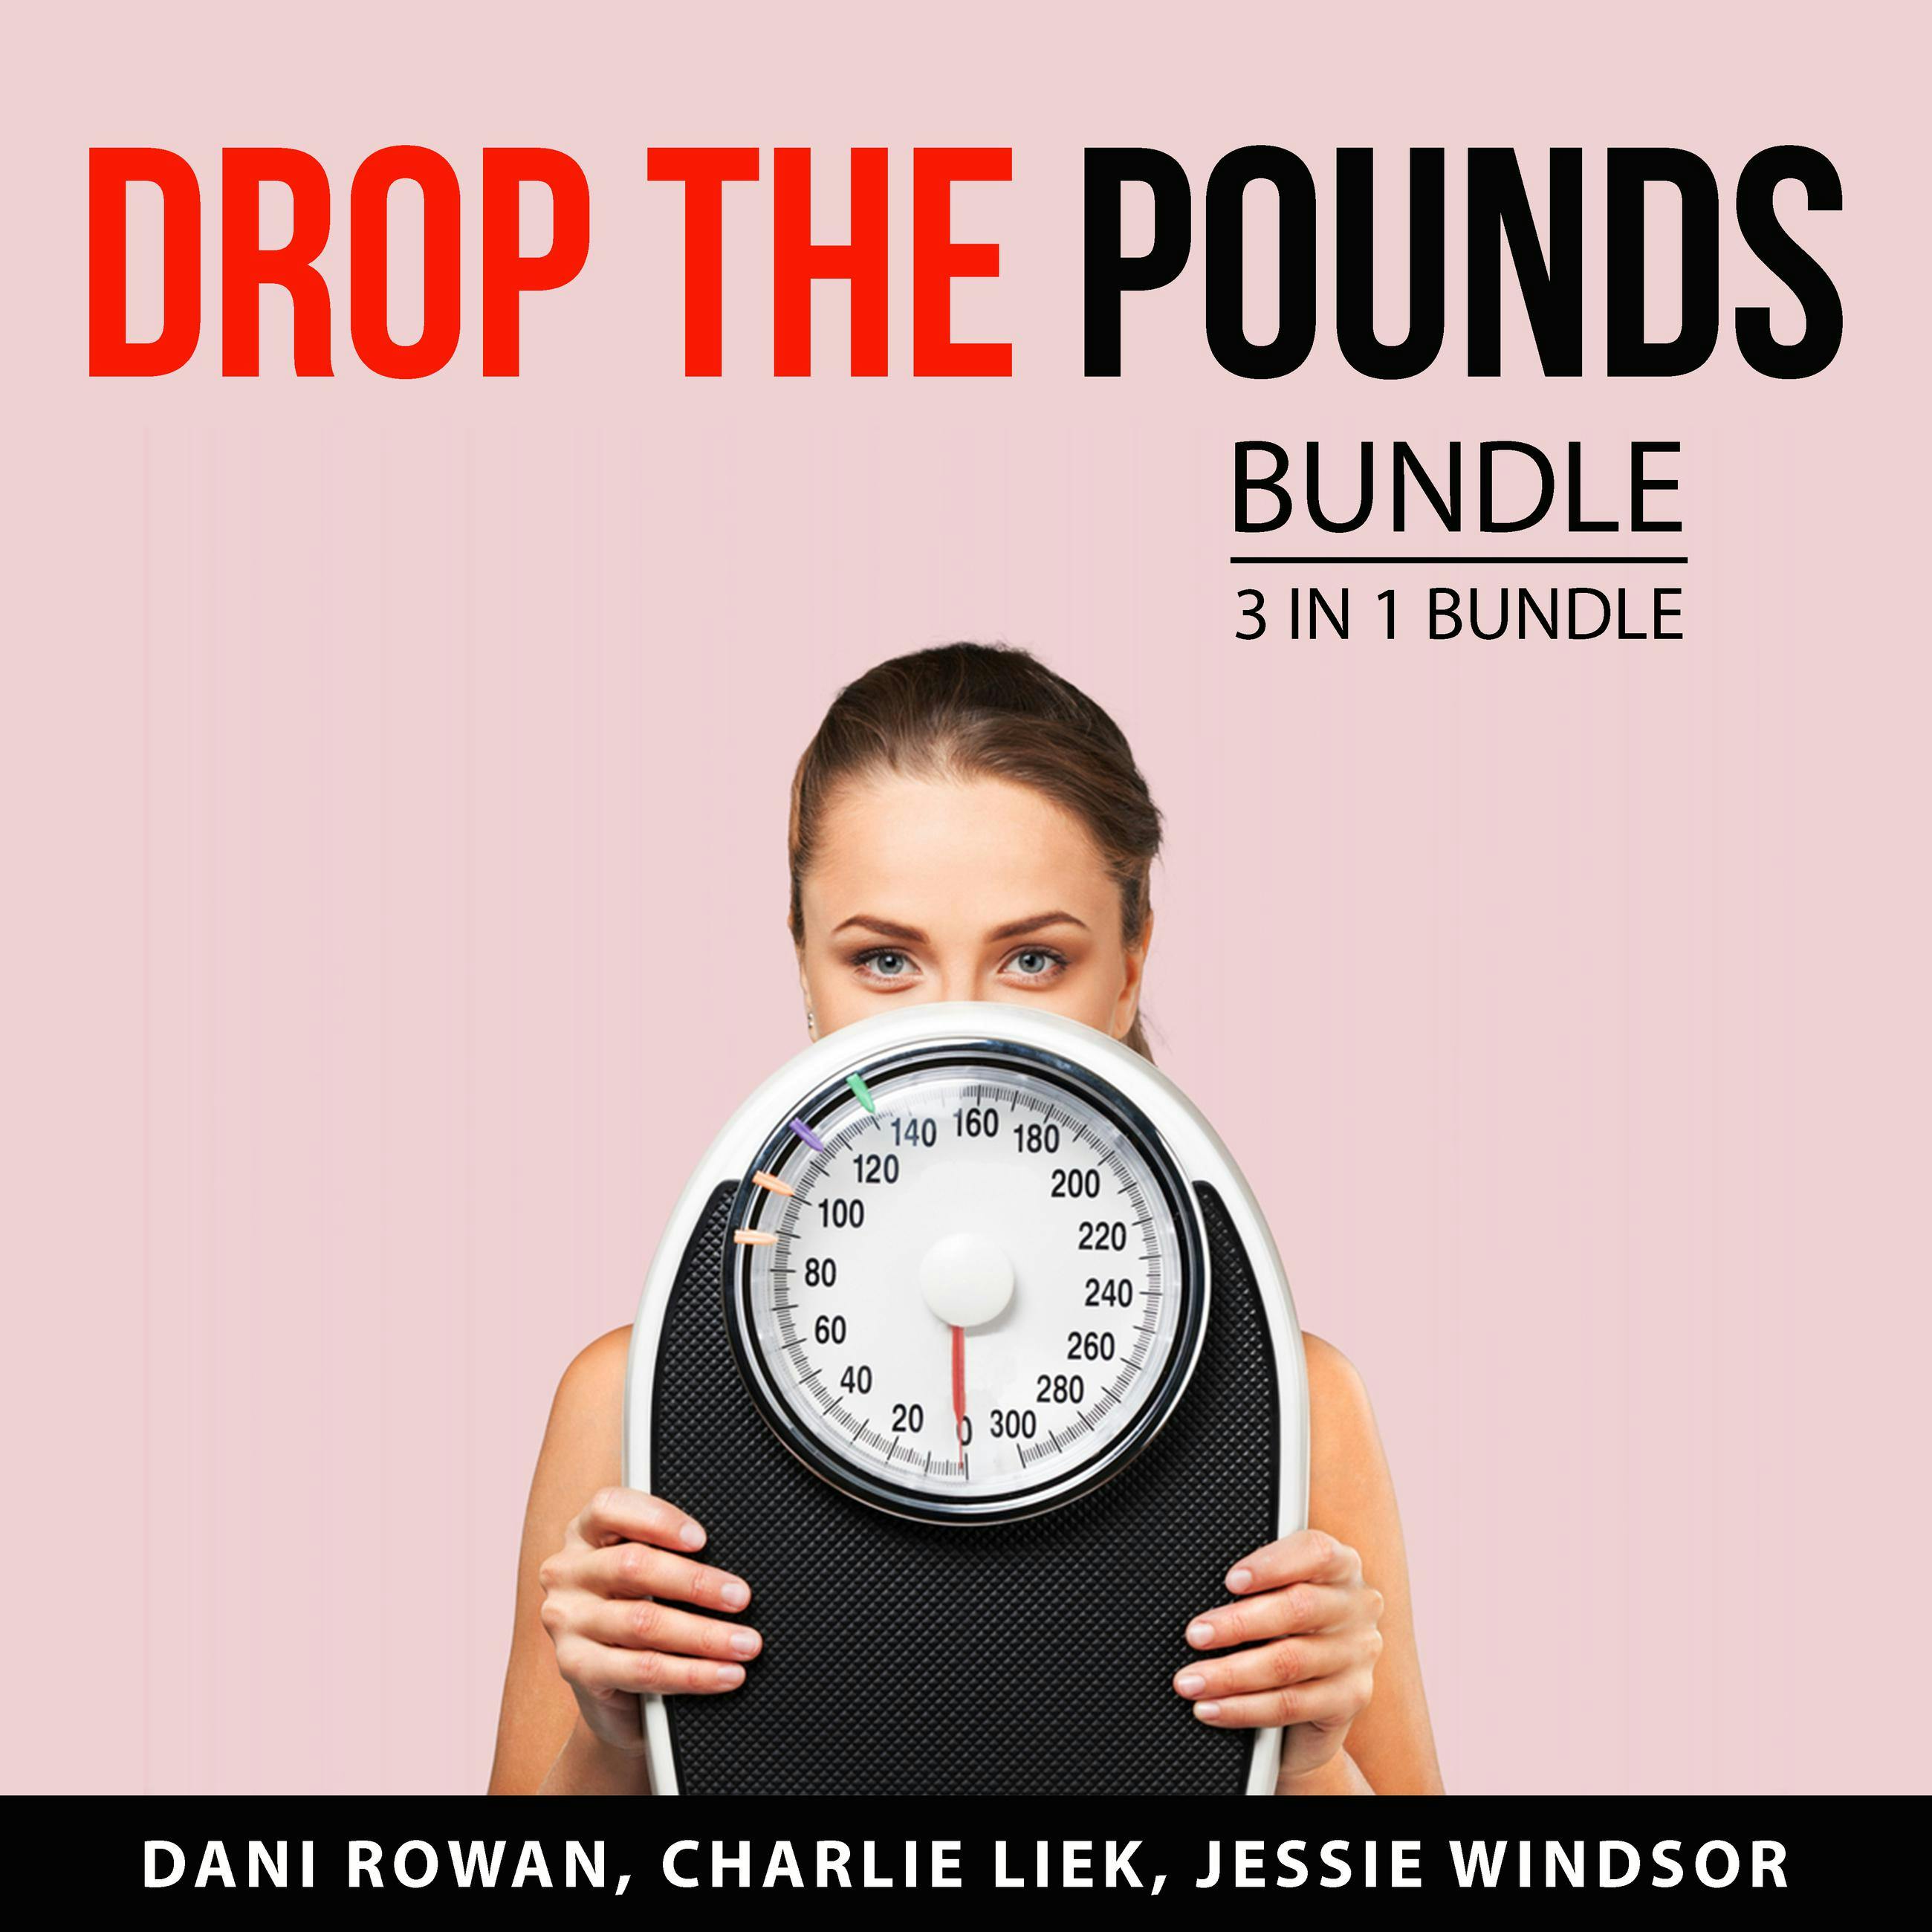 Drop the Pounds Bundle, 3 in 1 Bundle: Weight Loss and Body Transformation, Lose the Pounds, and Body Fat Loss - undefined